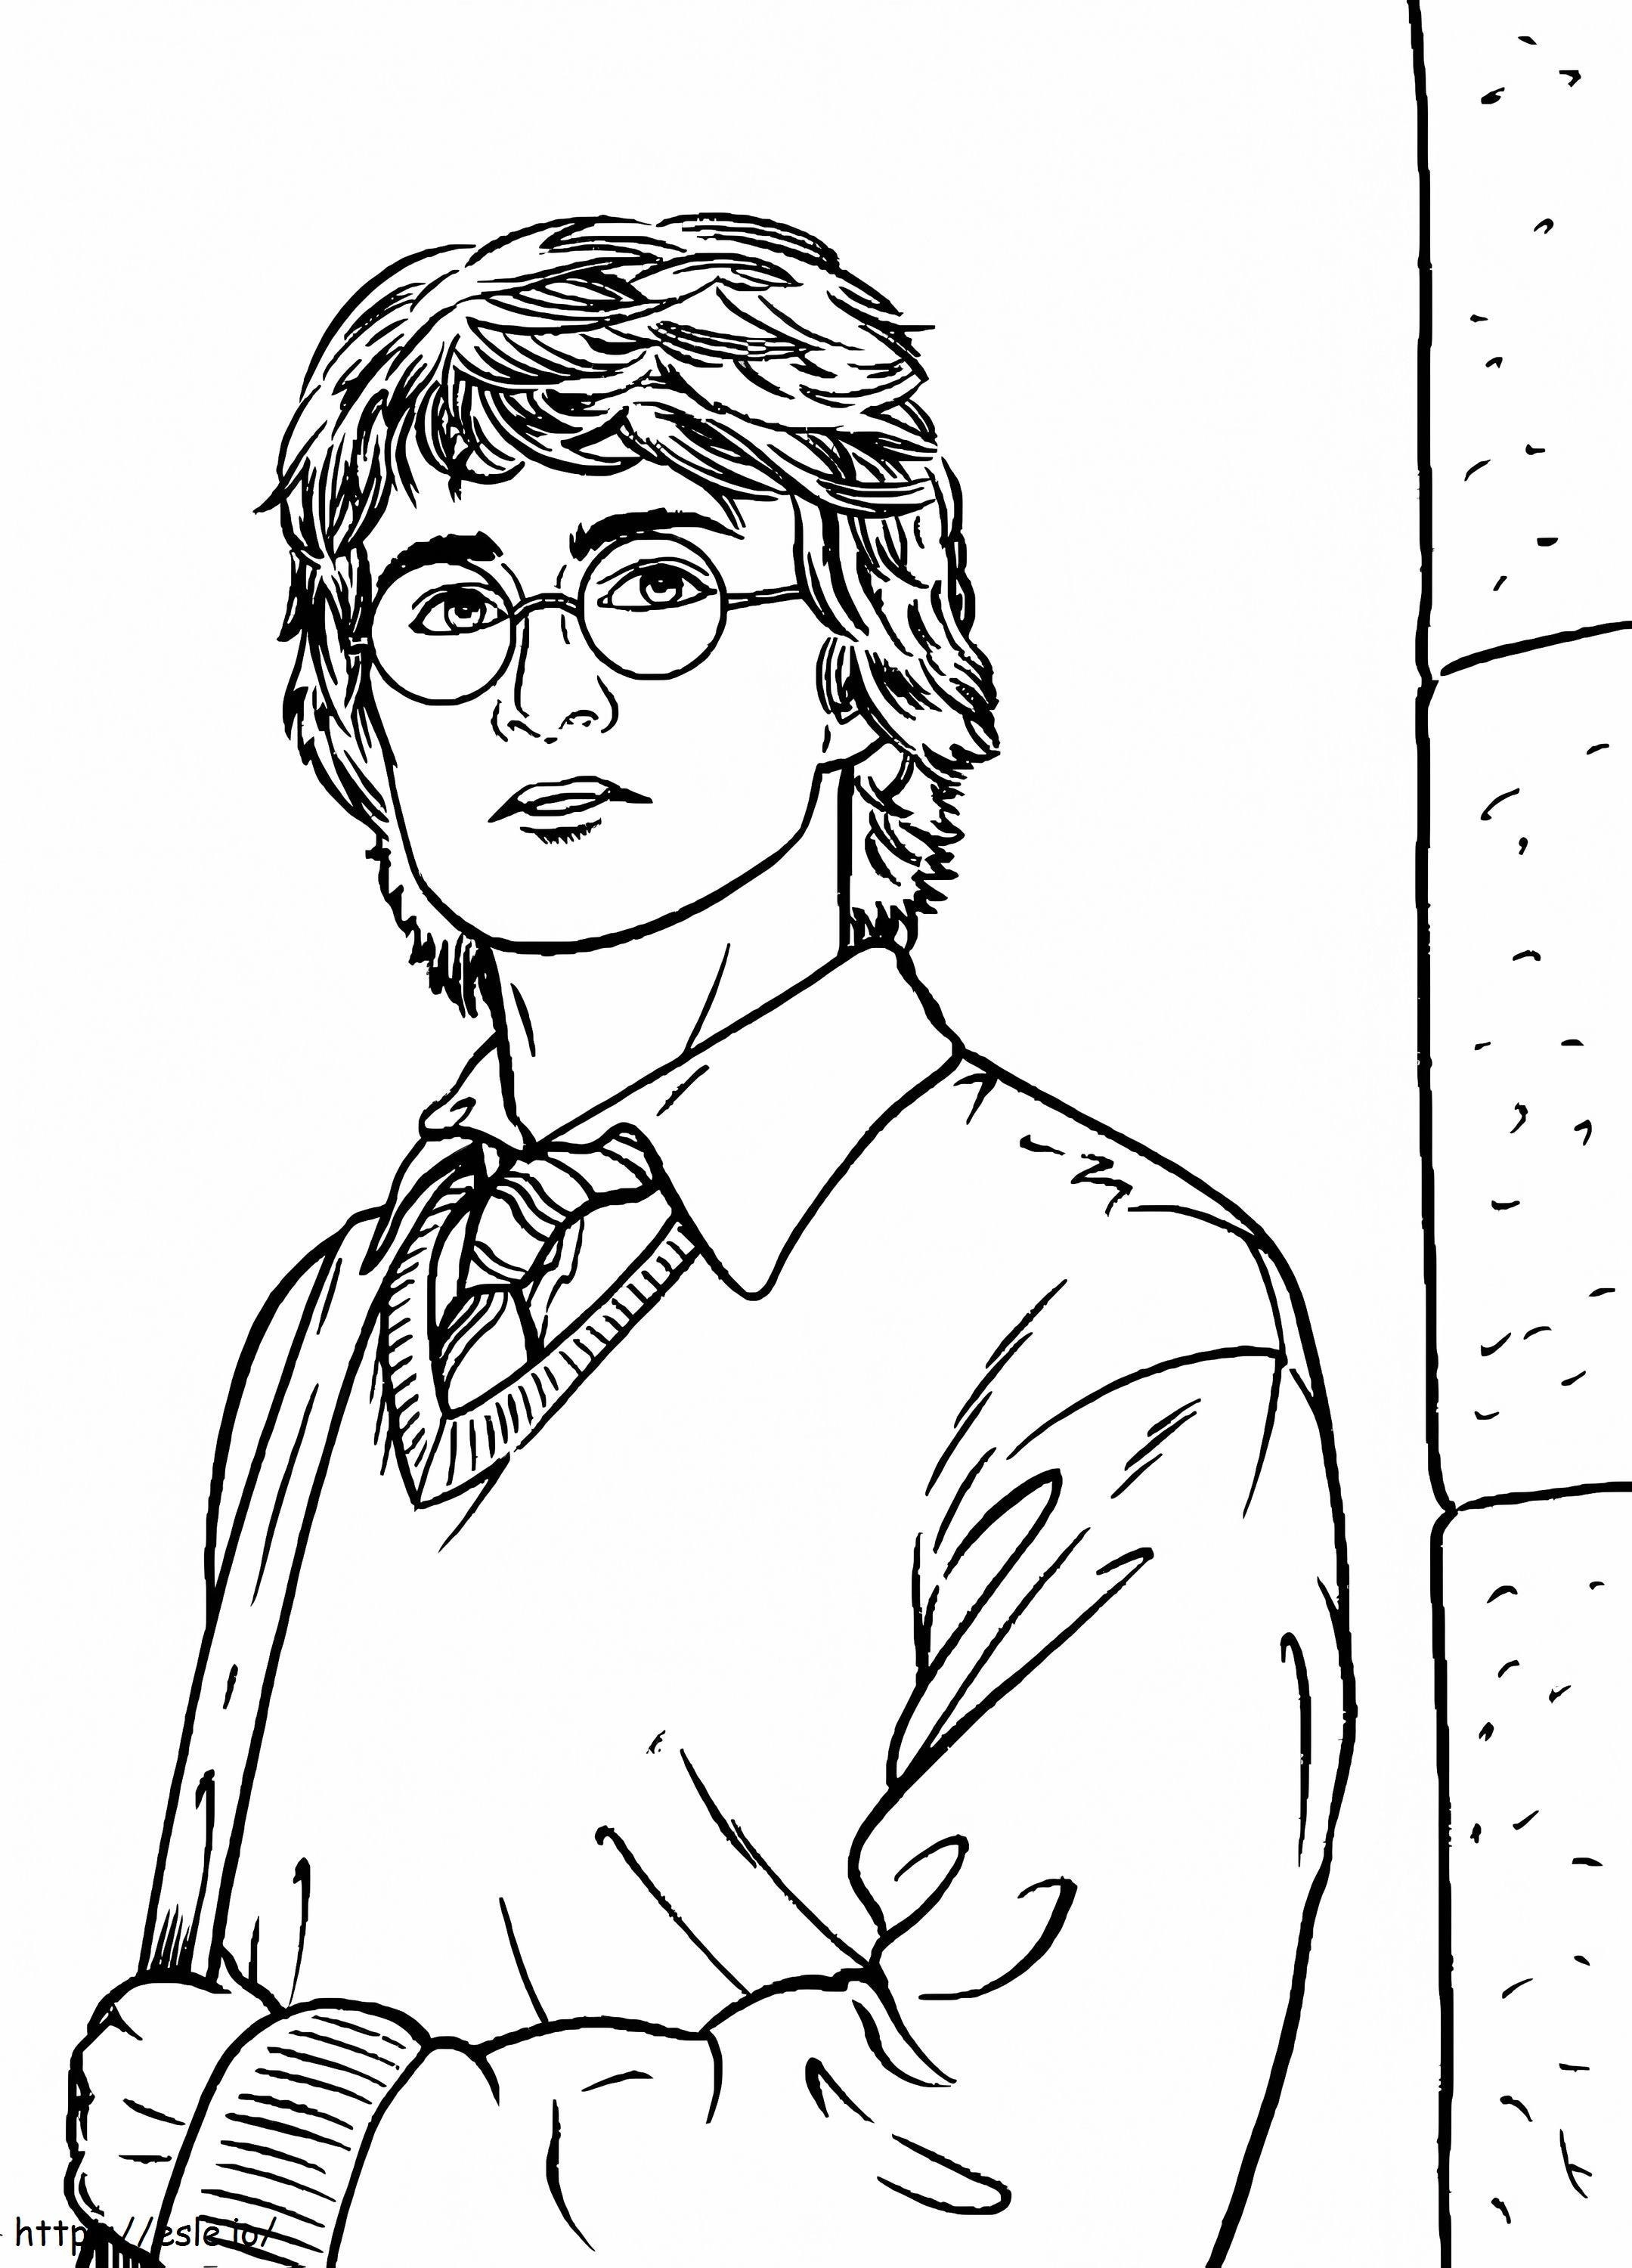 Harry Potter 4 coloring page